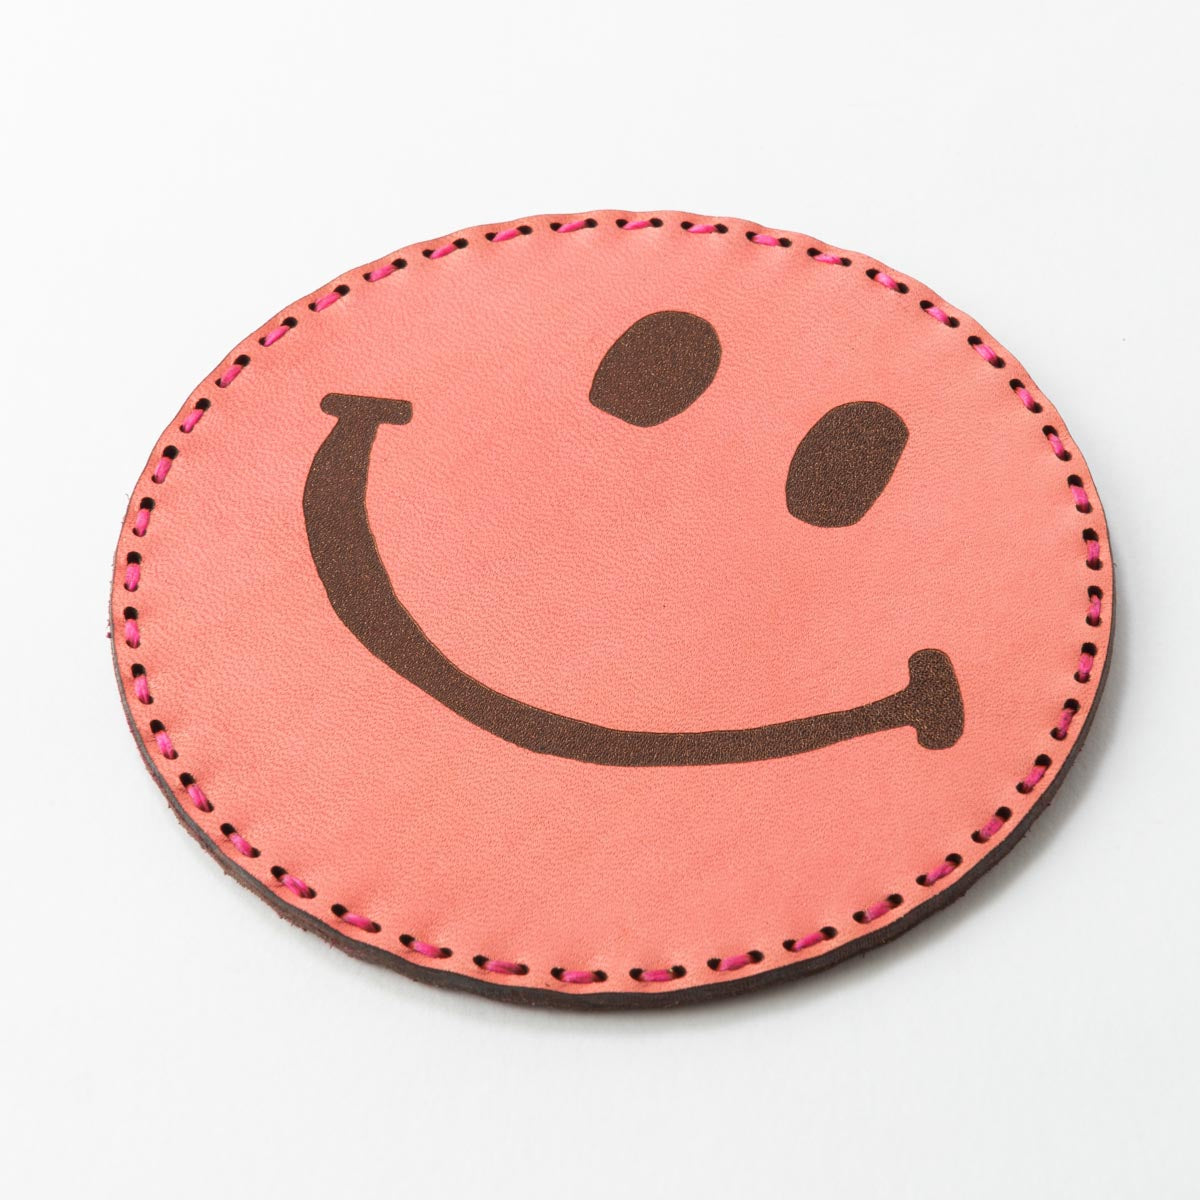 Fire-King レザーコースター SMILEY FACE レッド by OJAGA DESIGN